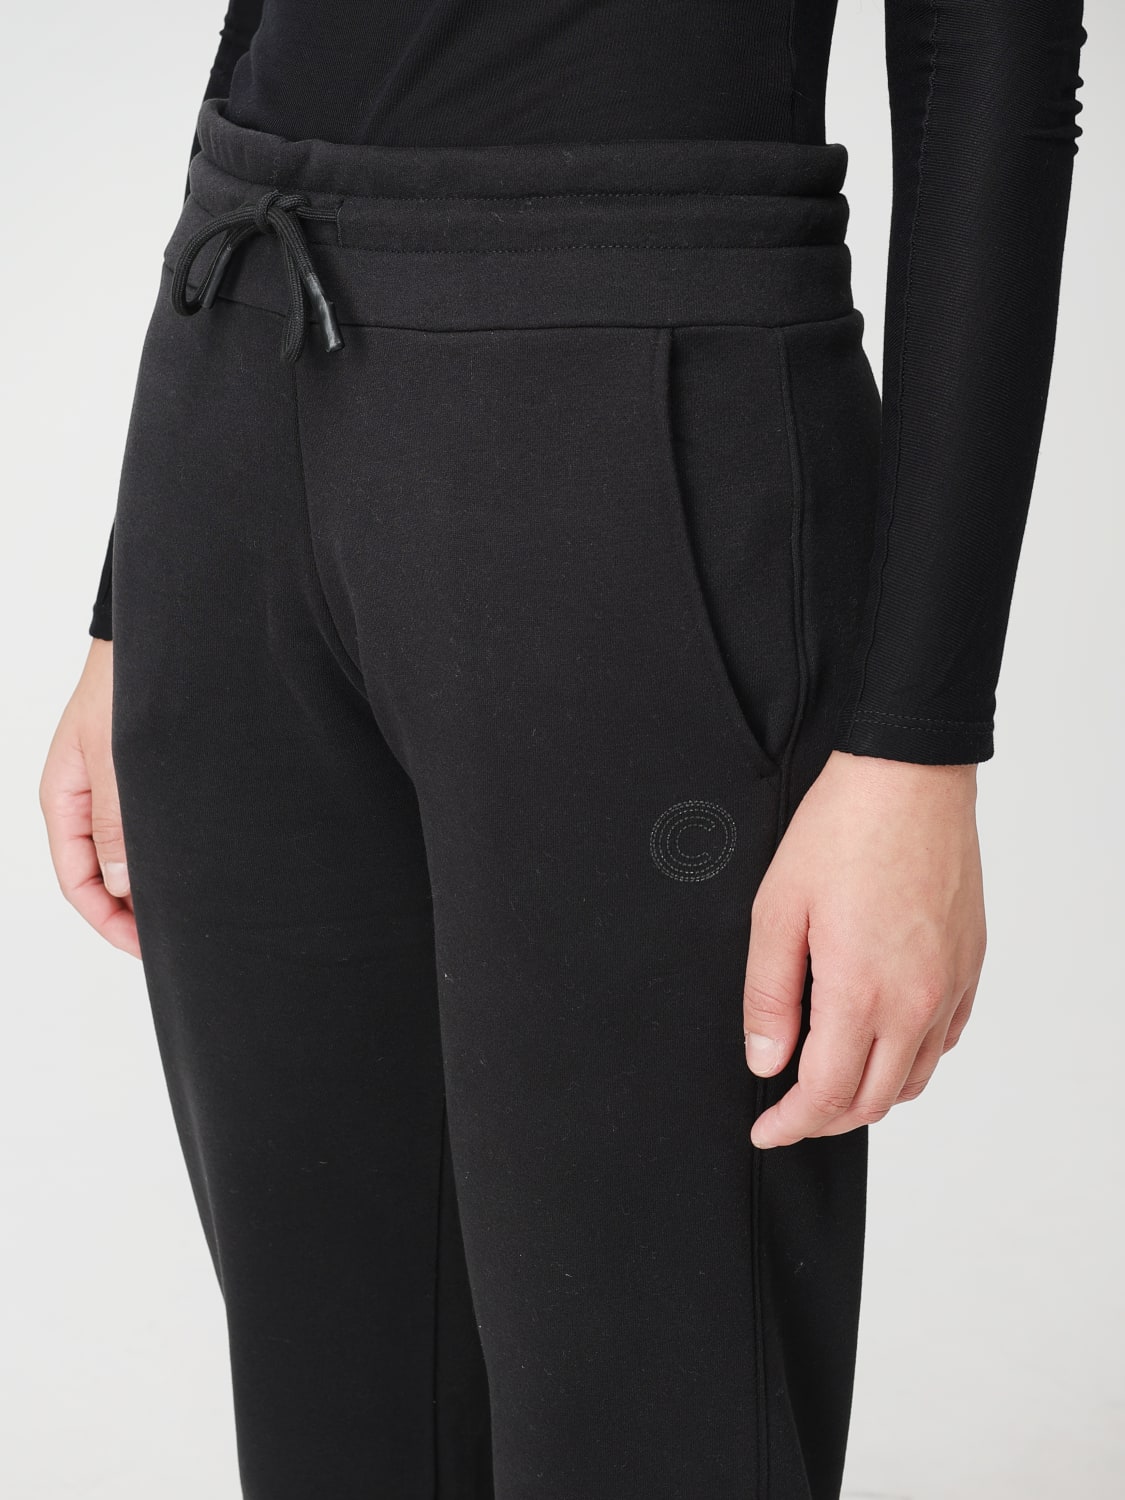 COLMAR: pants for woman - Black | Colmar pants 92356WY online at GIGLIO.COM